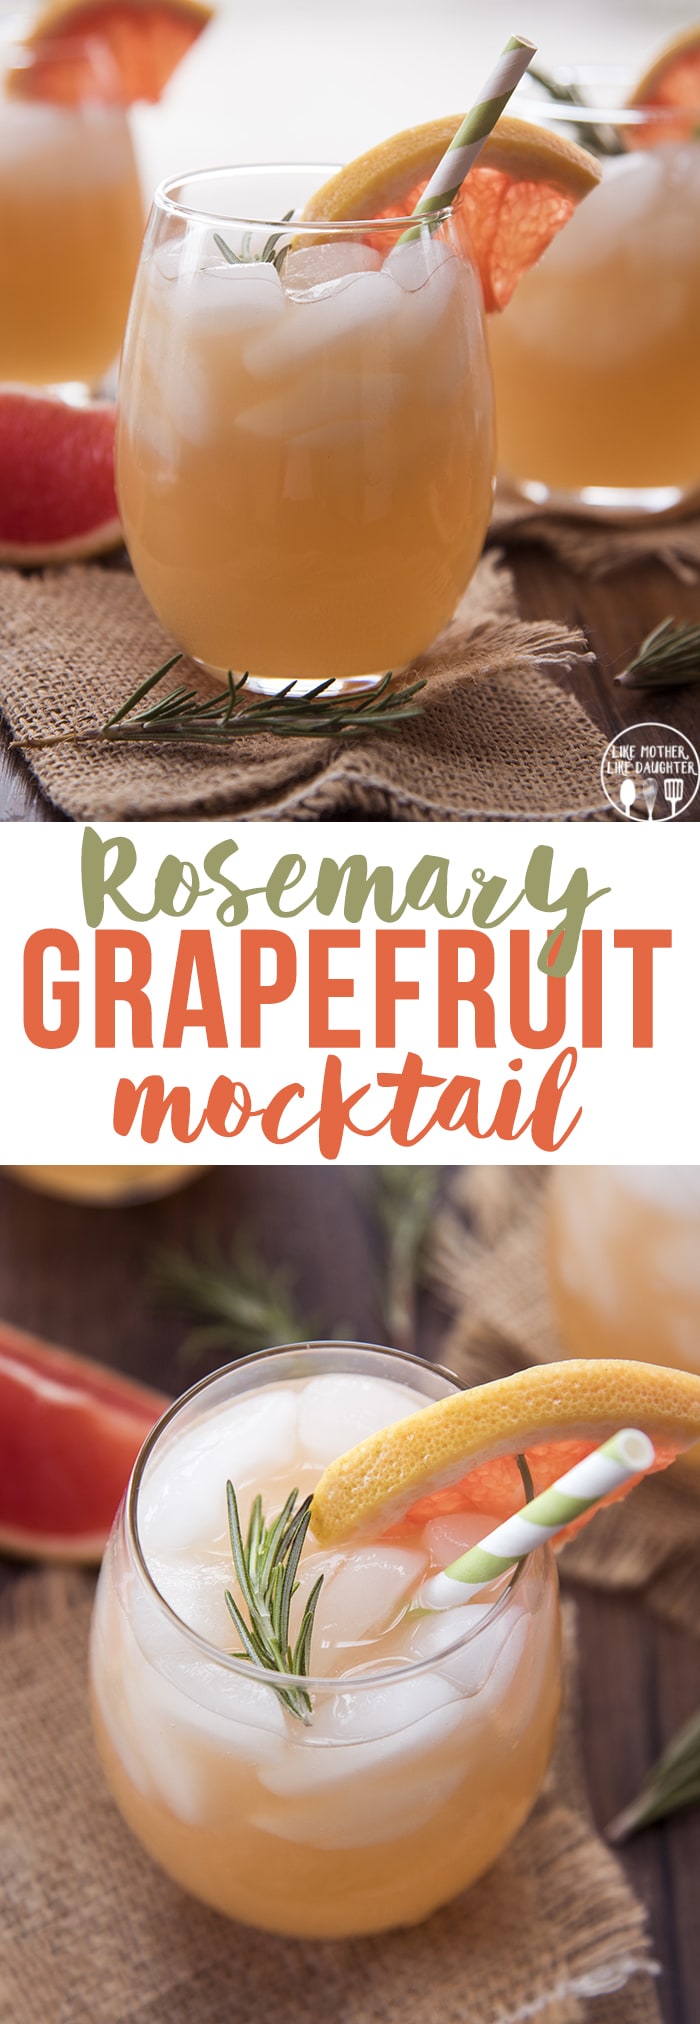 Rosemary Grapefruit Mocktail is a perfect refreshing drink made with grapefruit juice, club soda and a sweet syrup made with fresh rosemary!